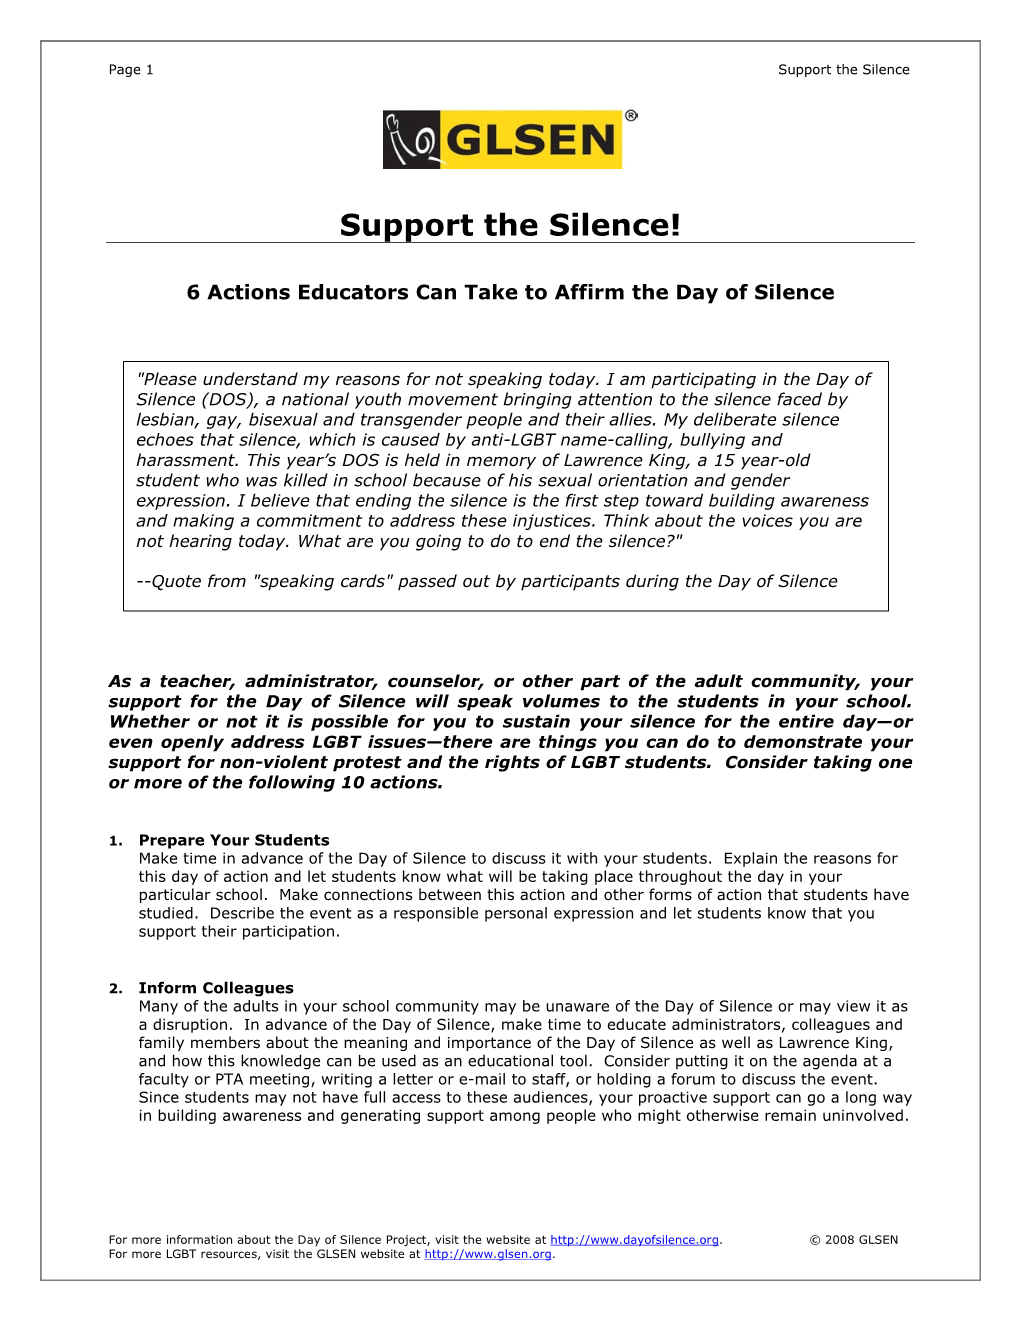 Support the Silence